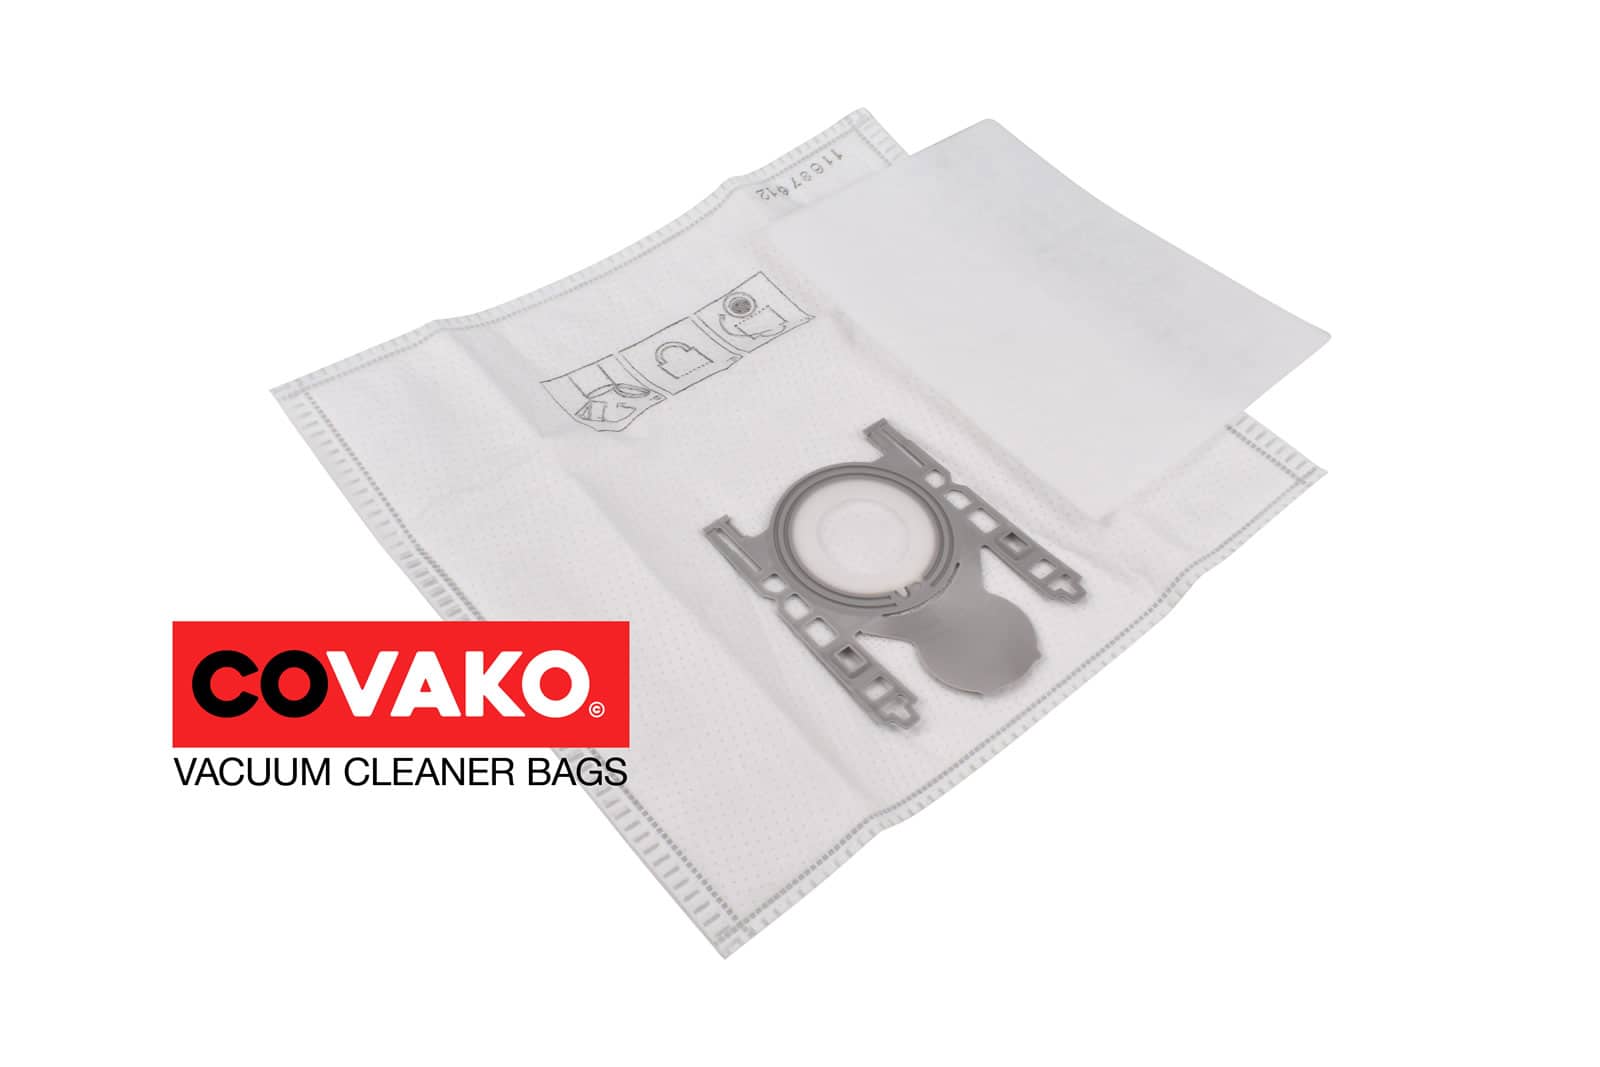 Bosch Formula 2200 / Synthesis - Bosch vacuum cleaner bags